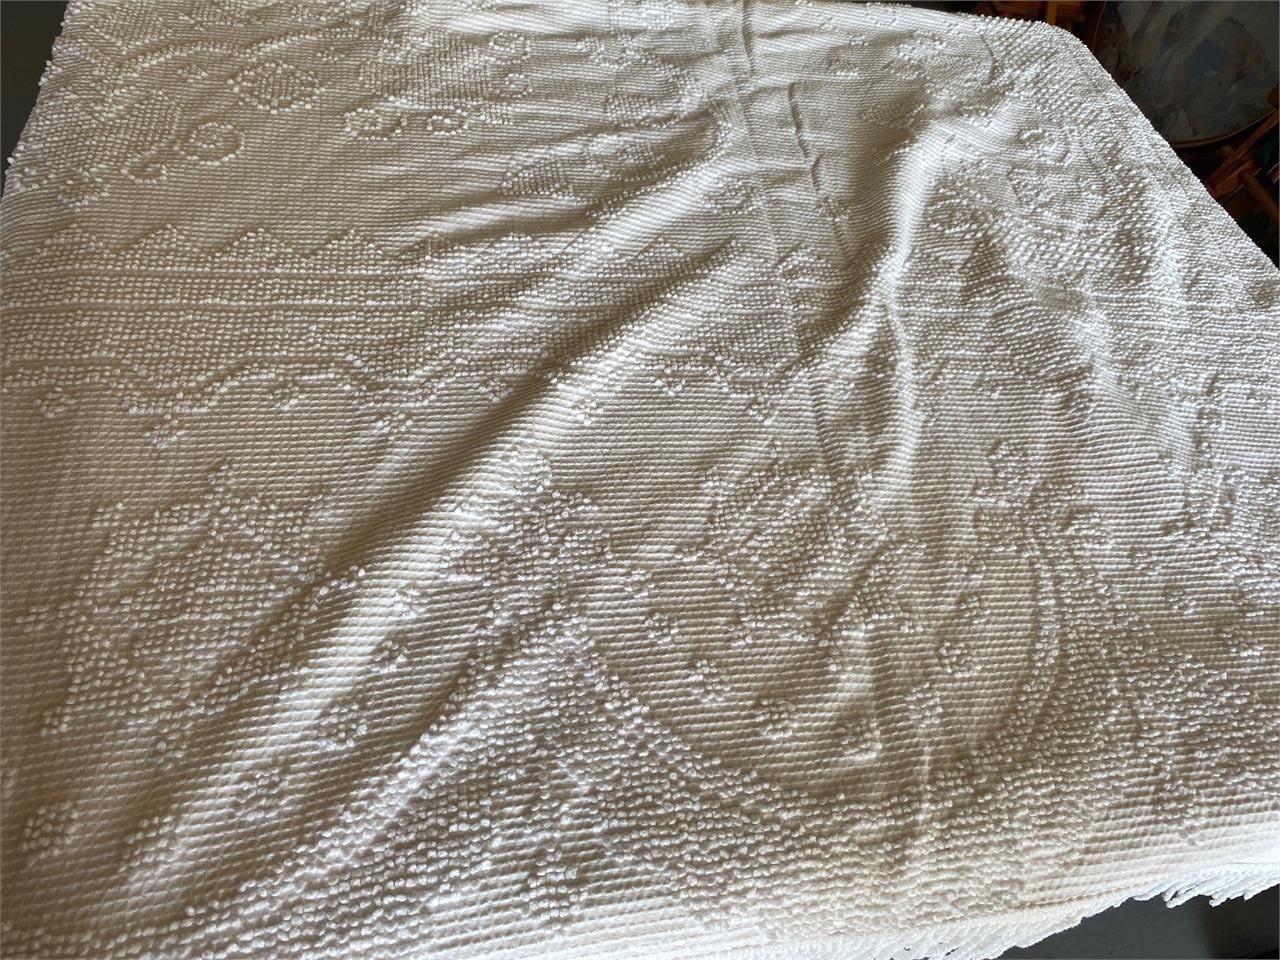 88” x 108” Vintage Bed Cover